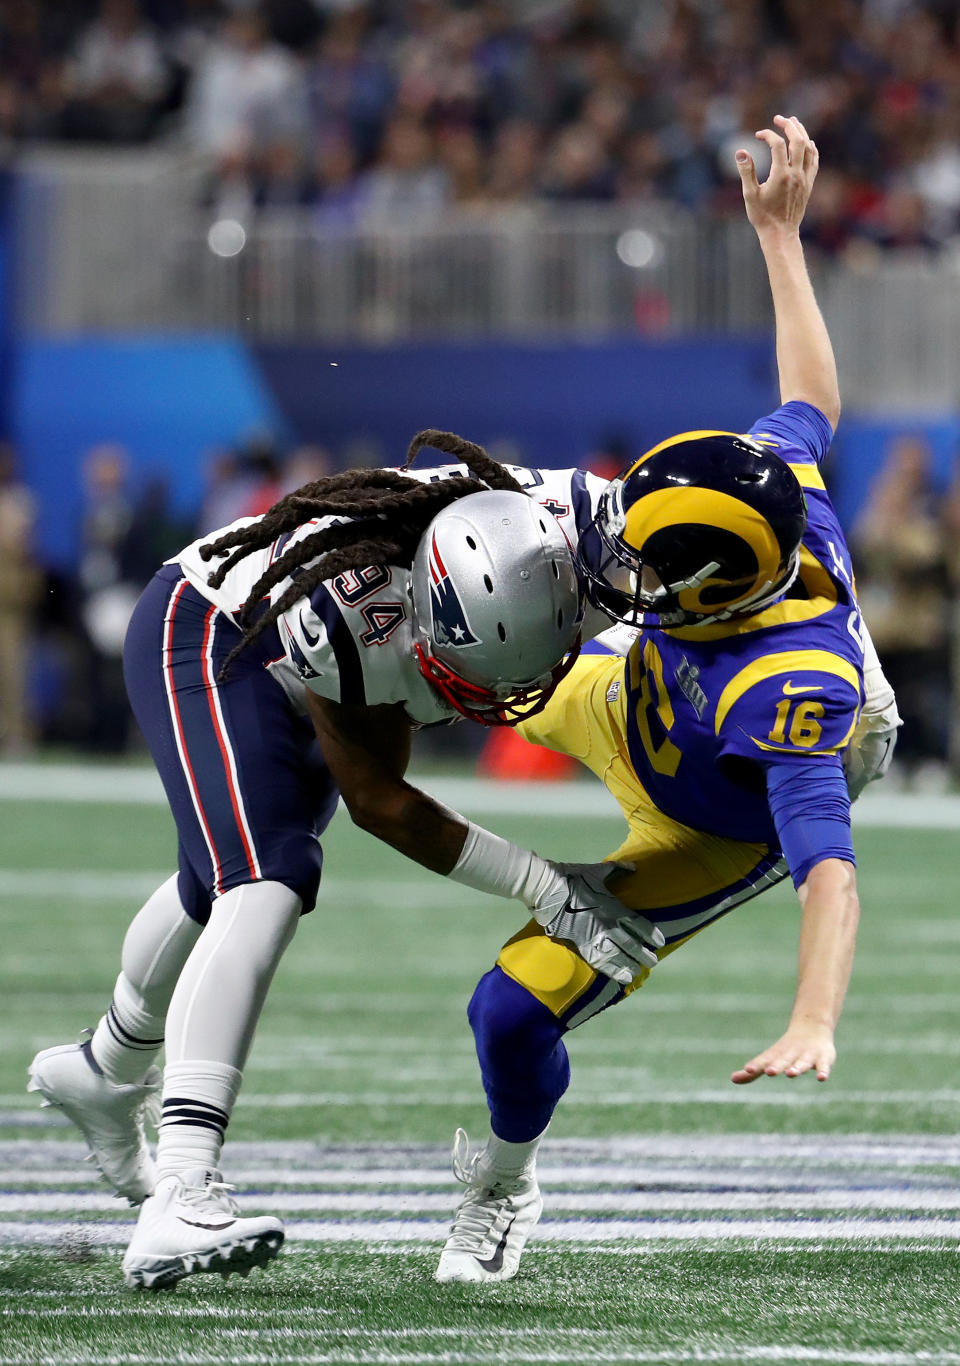 <p>Jared Goff #16 of the Los Angeles Rams is tackled by Adrian Clayborn #94 of the New England Patriots in the first quarter during Super Bowl LIII at Mercedes-Benz Stadium on February 03, 2019 in Atlanta, Georgia. (Photo by Al Bello/Getty Images) </p>